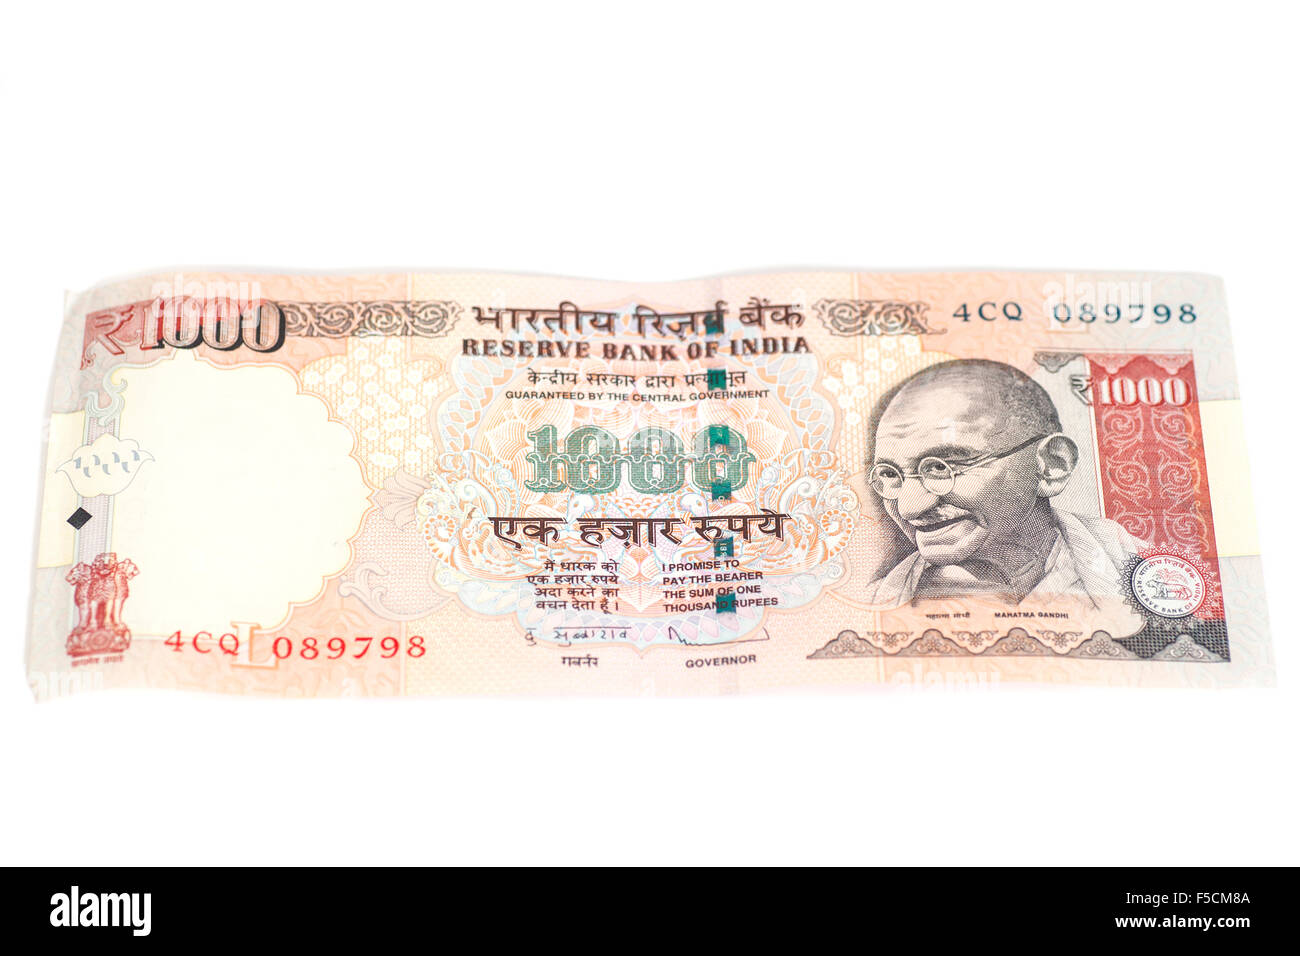 One thousand rupee note (Indian Currency) isolated on a white background Stock Photo